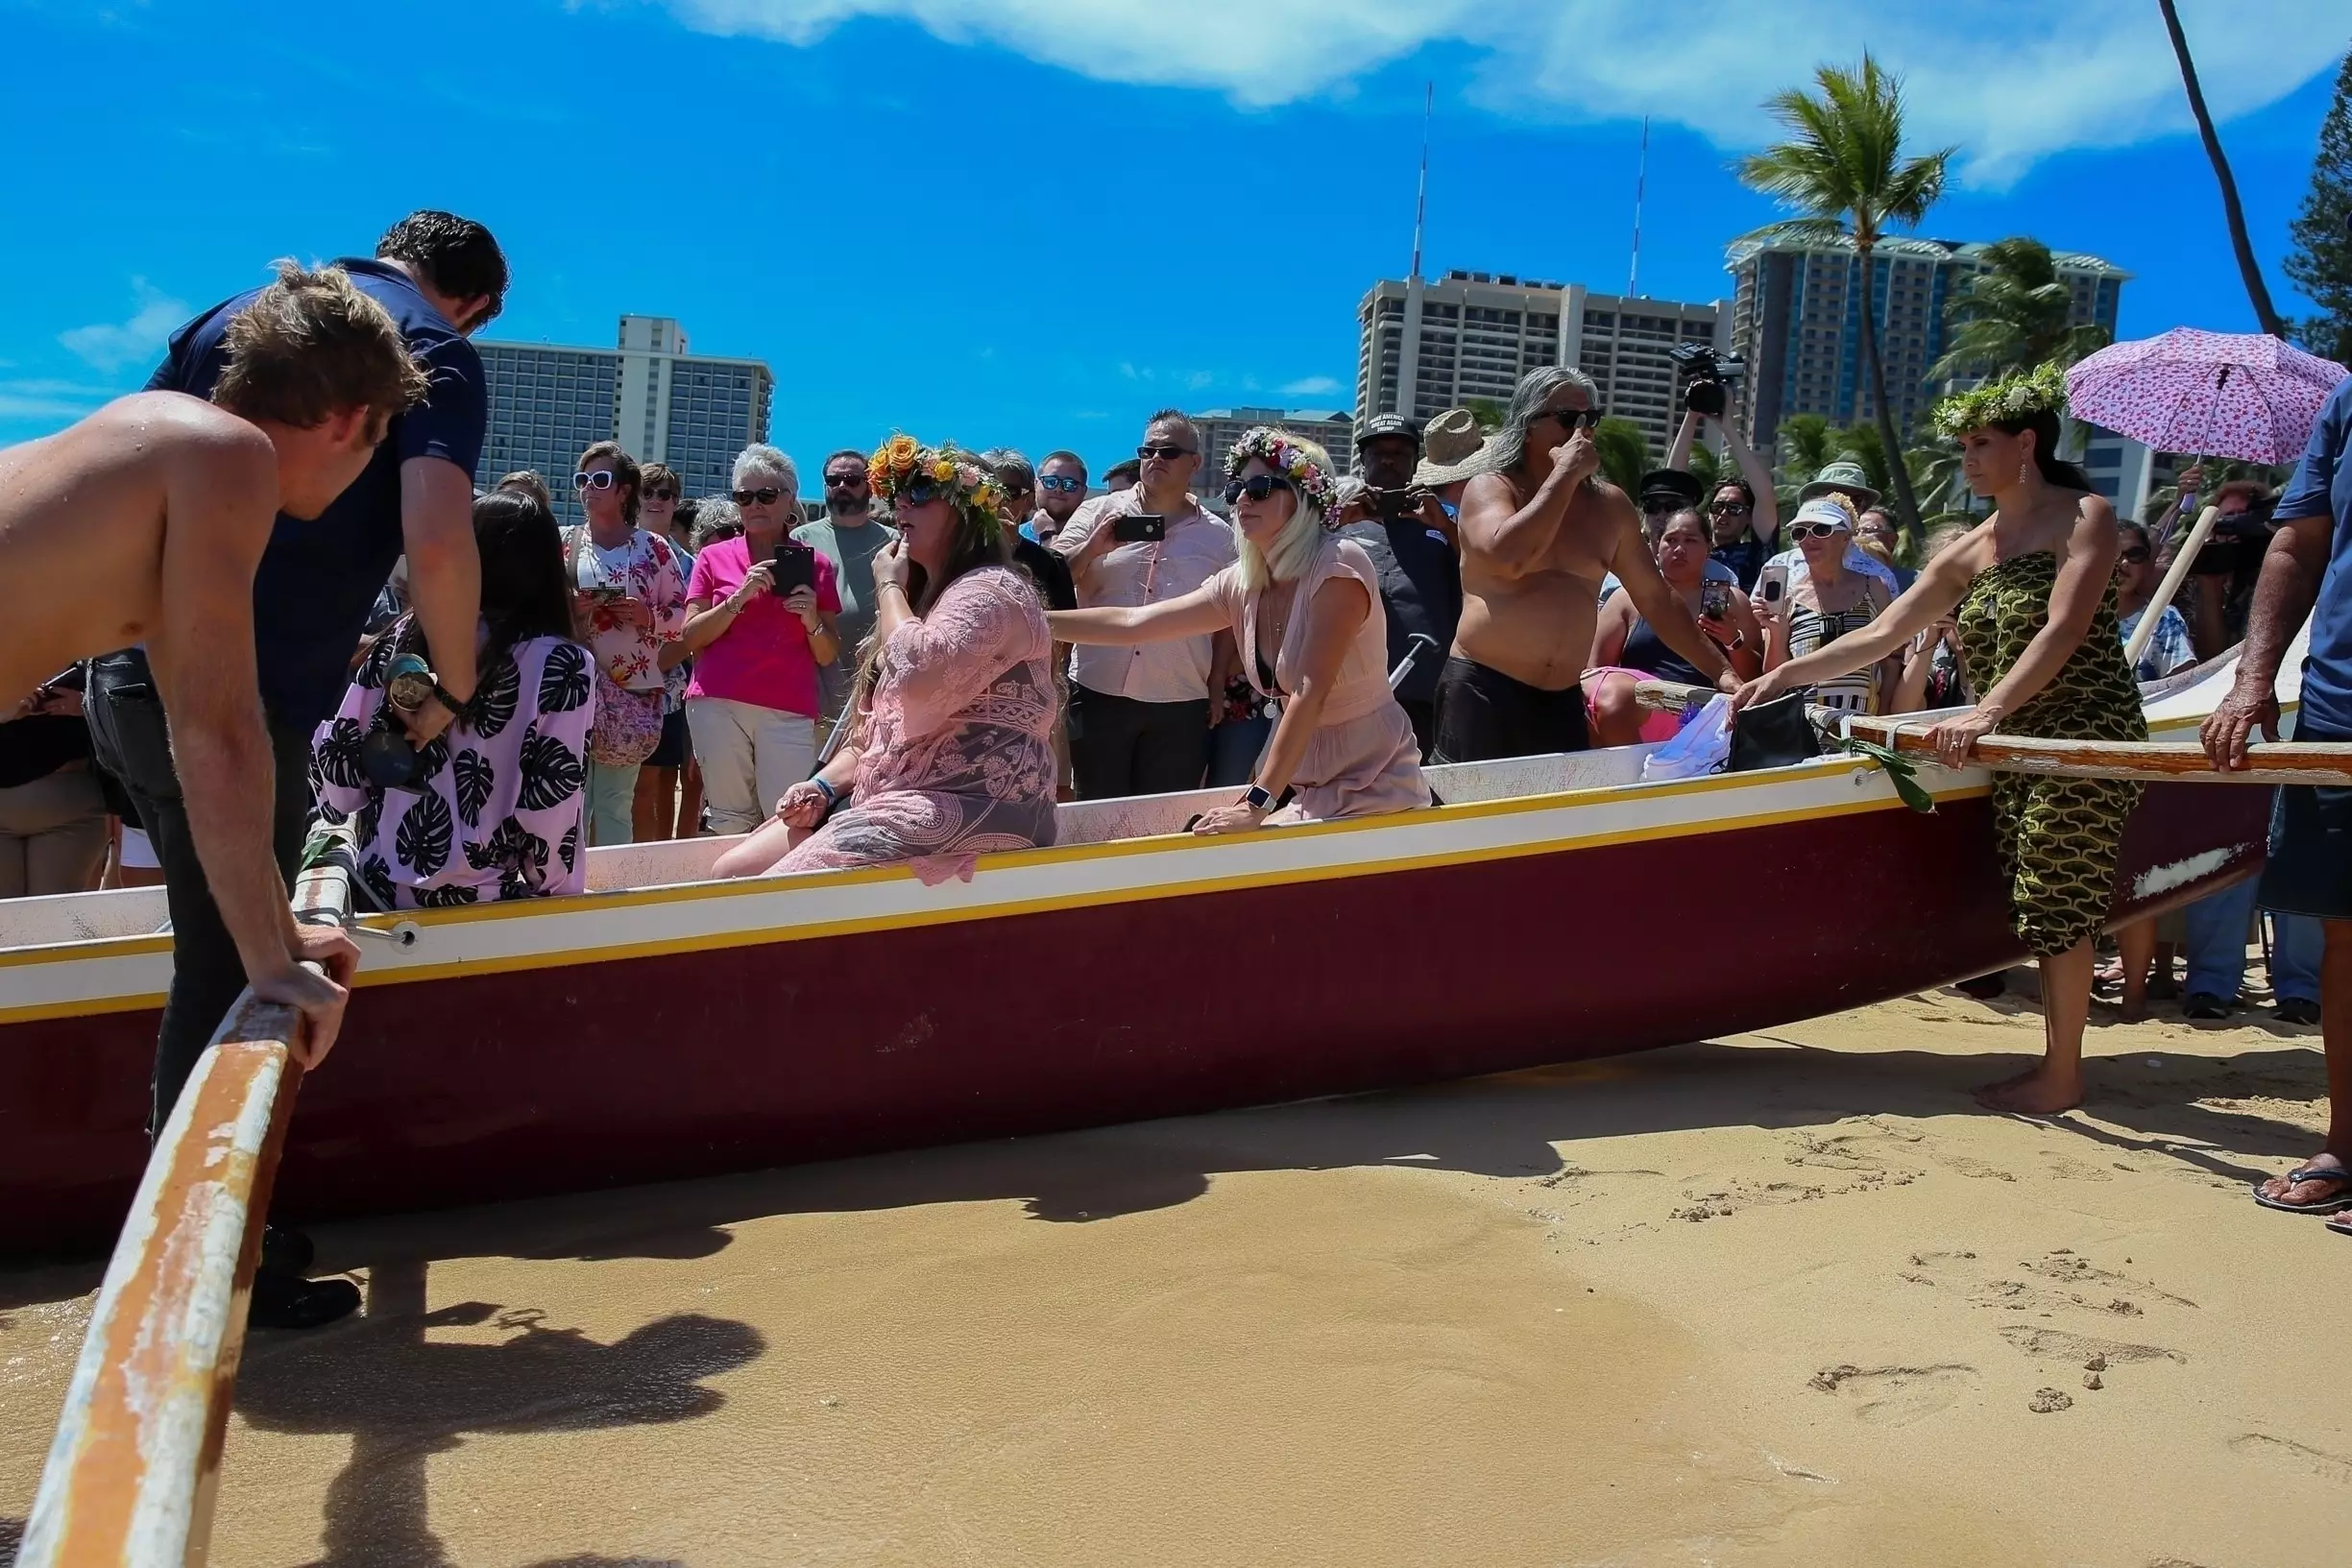 Mourners attended the memorial which was held on a beach in Hawaii.